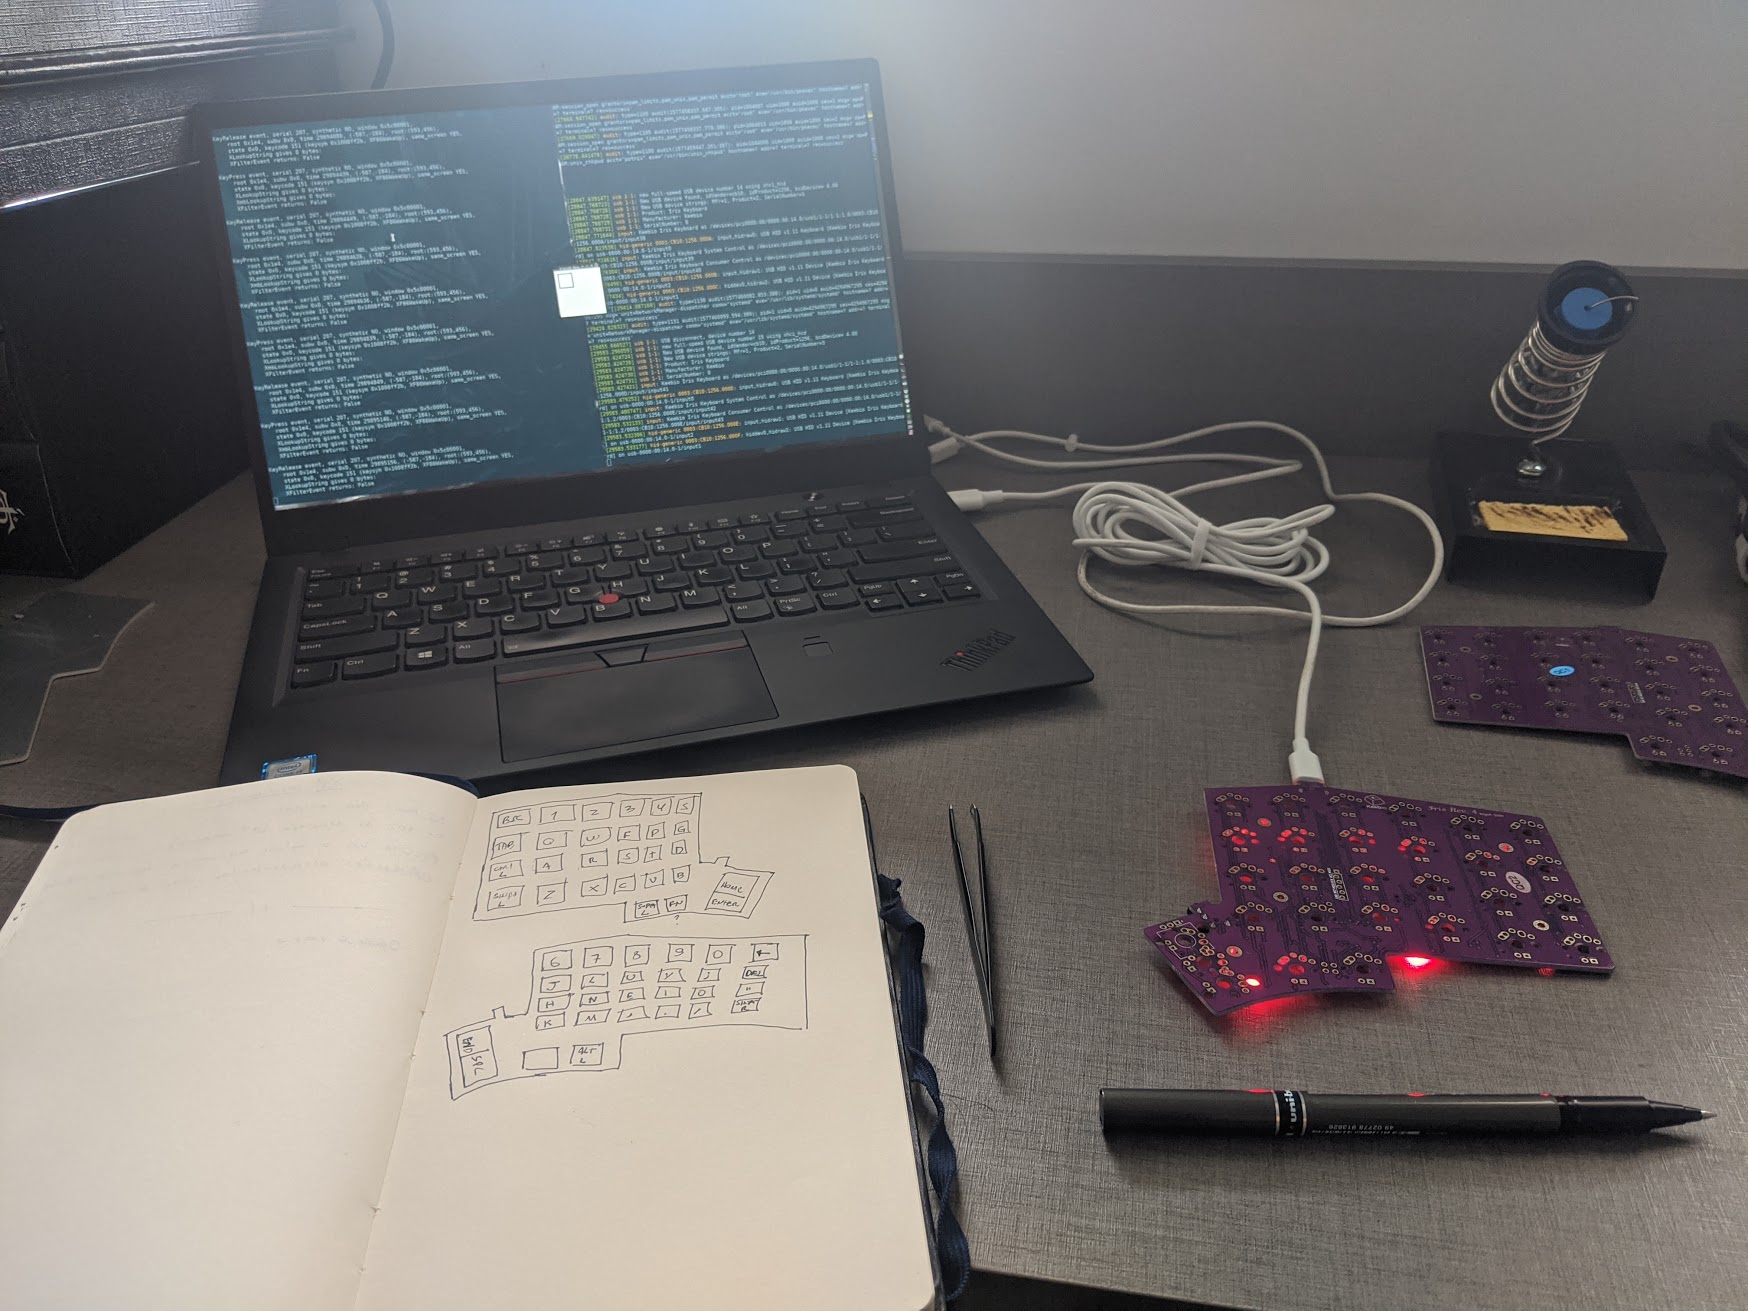 A laptop, a notebook with a drawing of the keyboard layout, and the PCB connected to the laptop